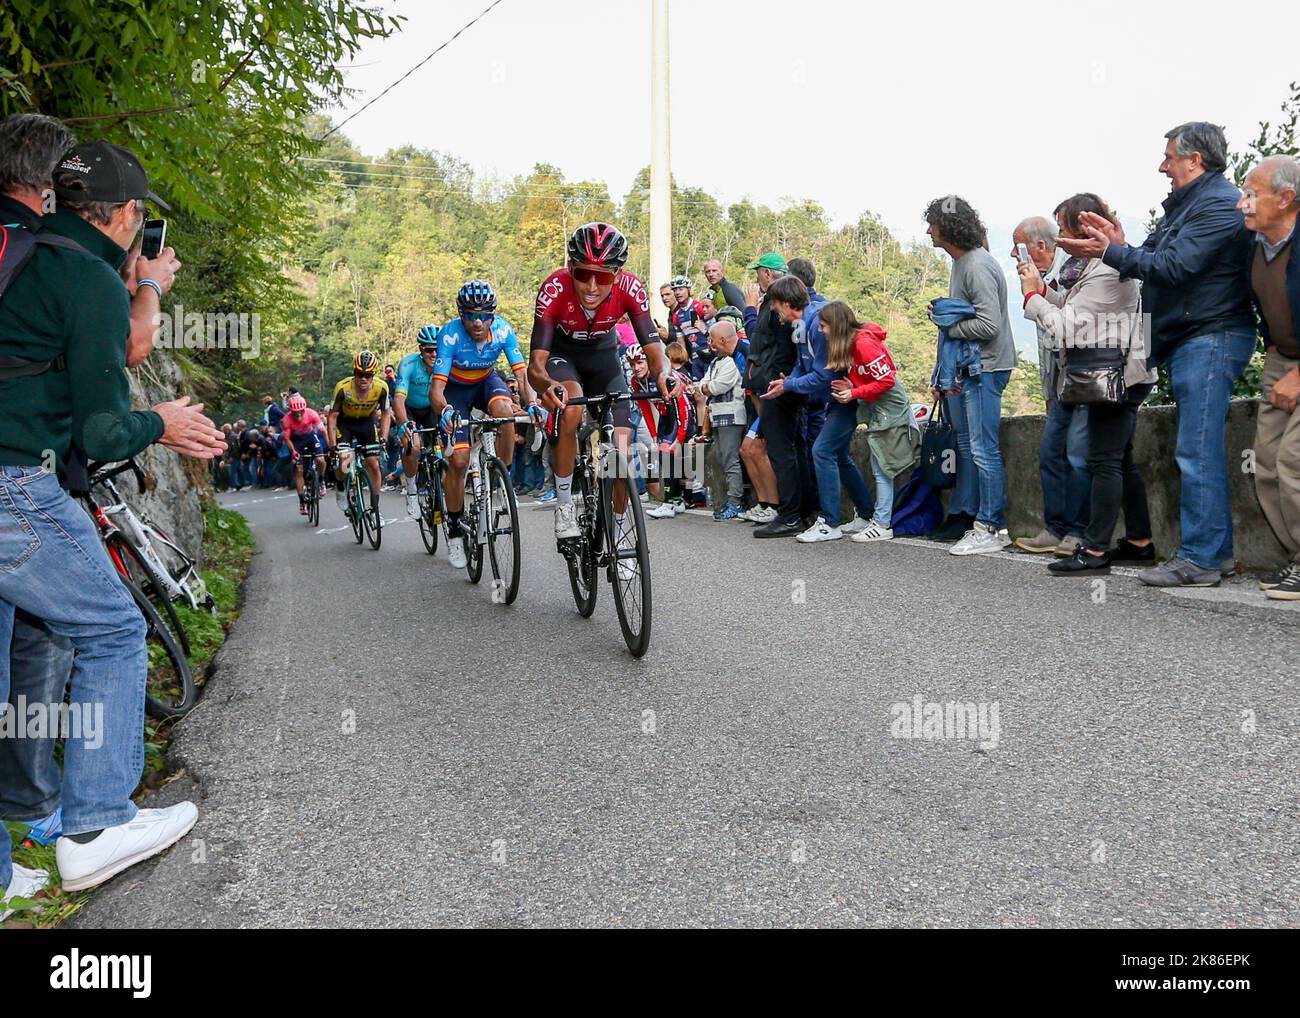 Egan Bernal of team Ineos during the Il Lombardia 2019 race in Lombardia, Italy on Saturday October 12, 2019. Stock Photo